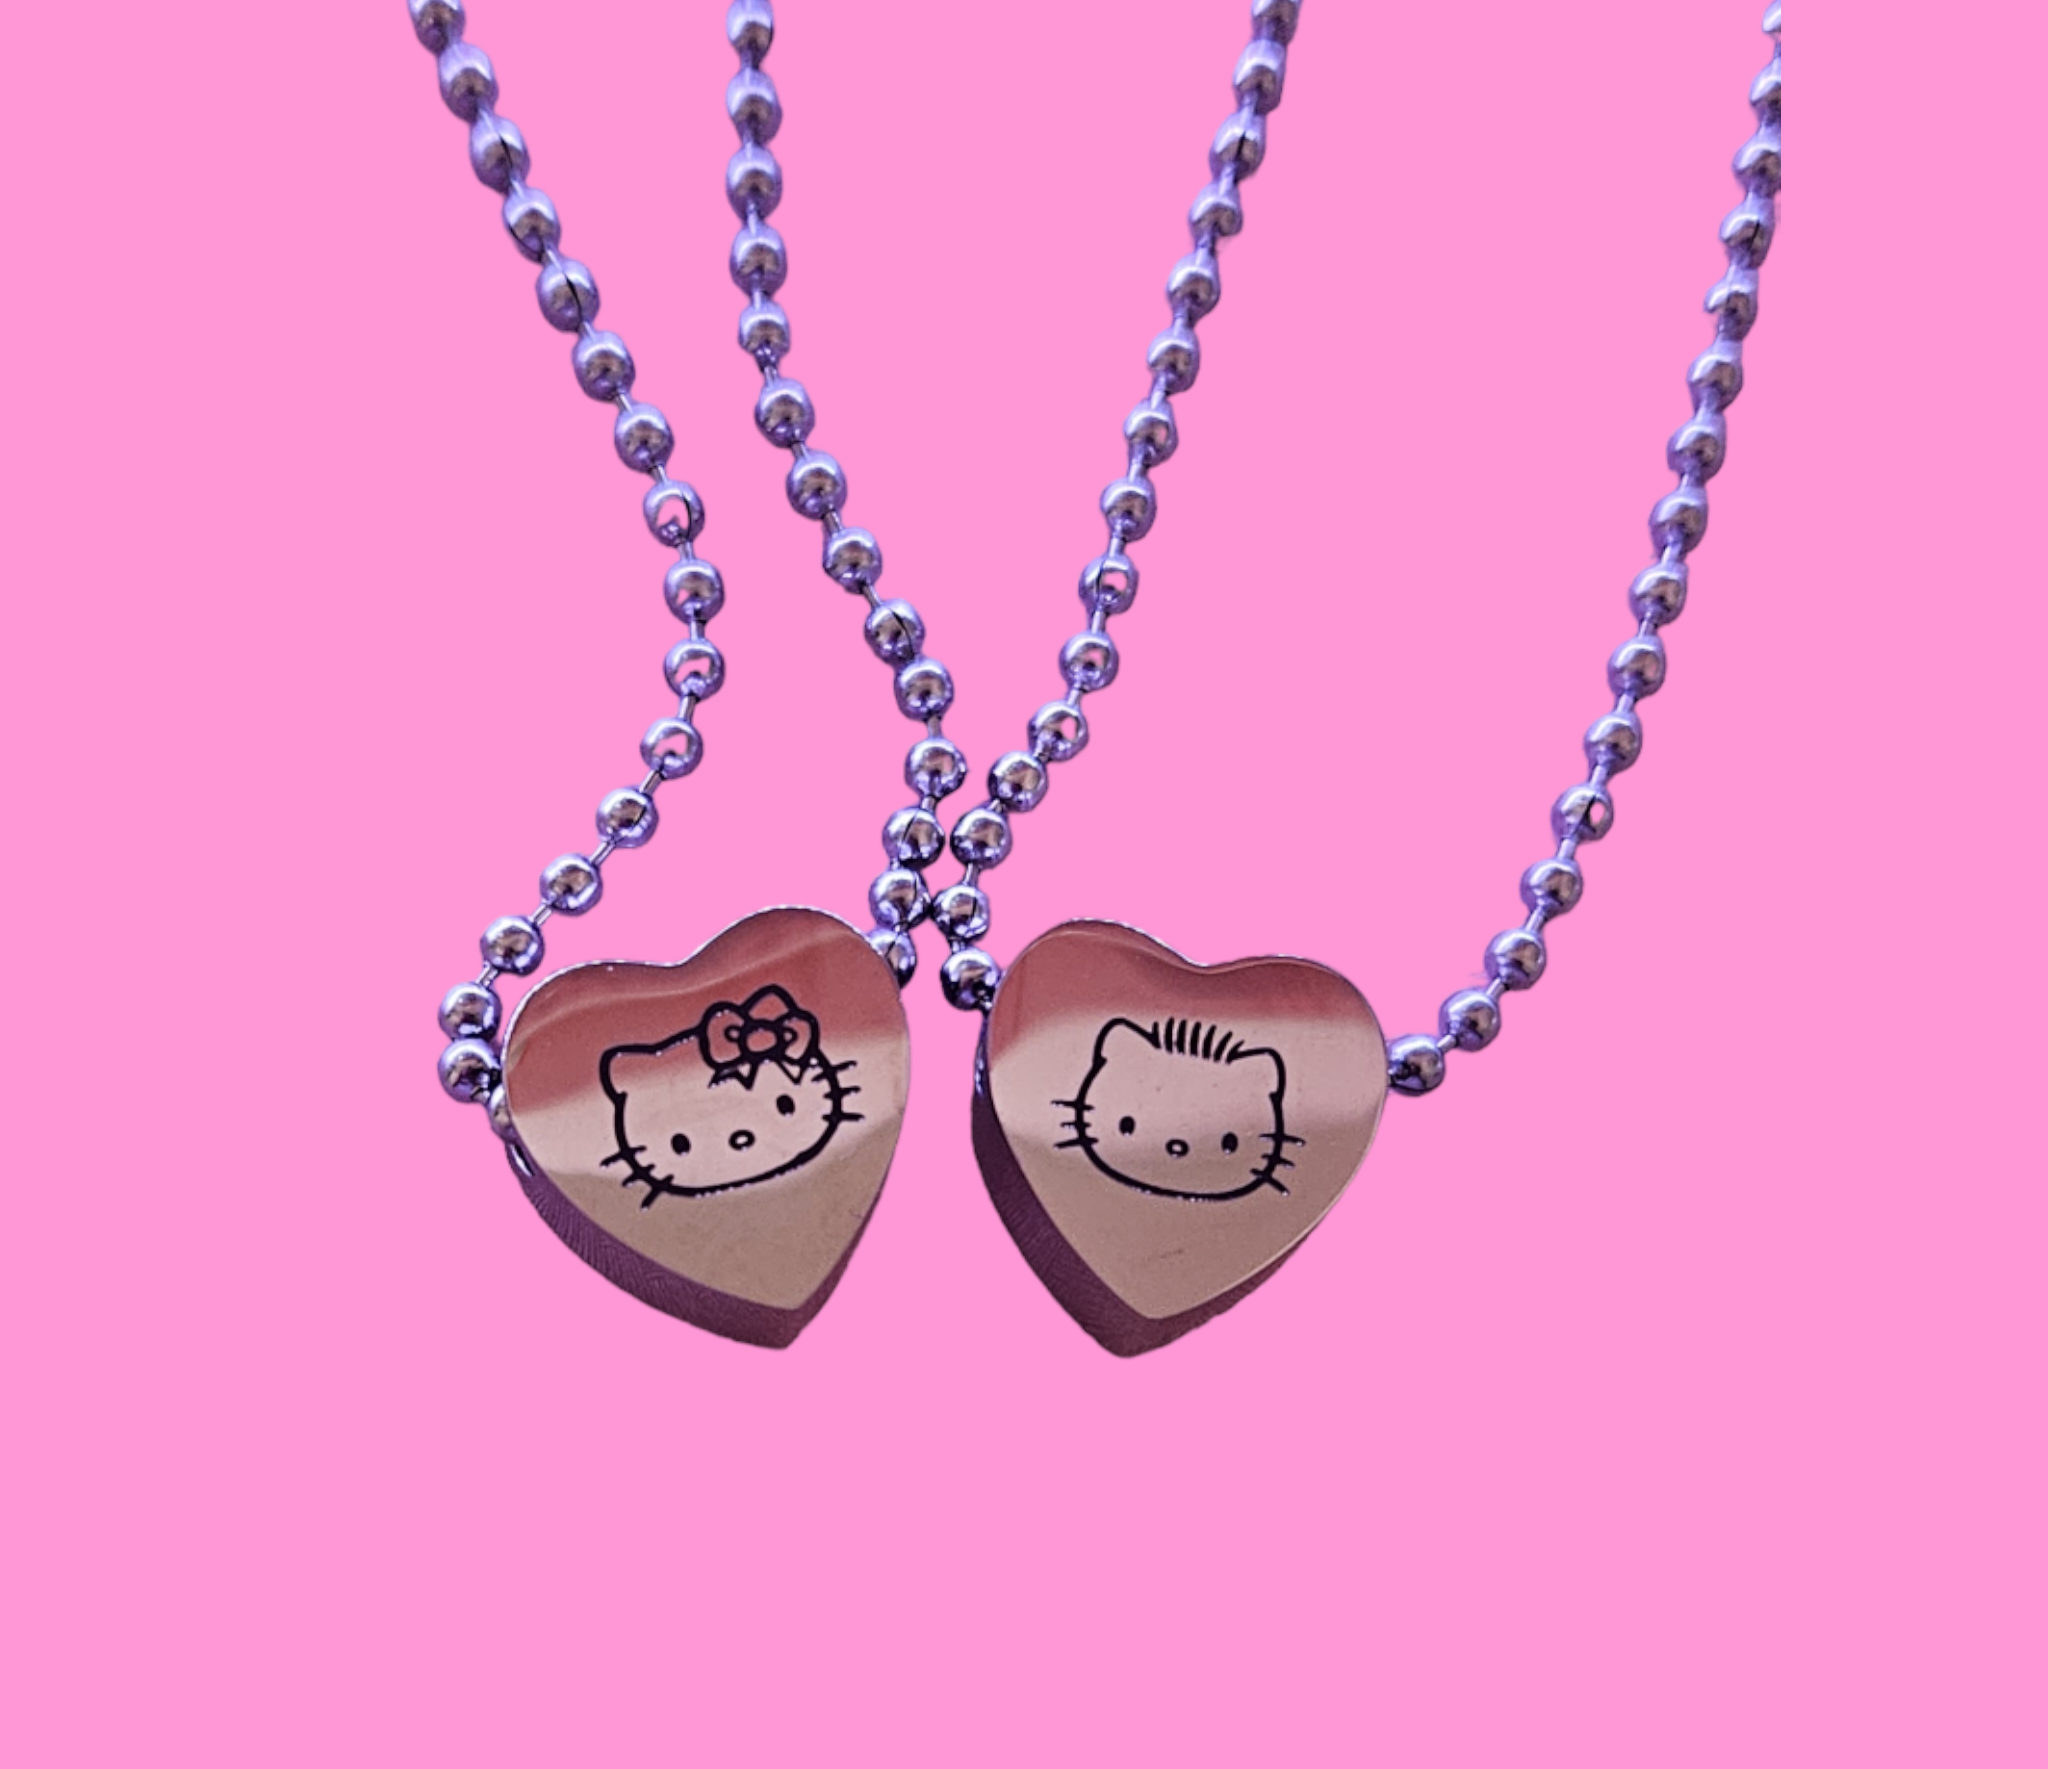 Hello Kitty - Let your BFF know that you cherish your friendship with one  of this supercute Best Friends necklace set! There's one for you and one  for your friend – so